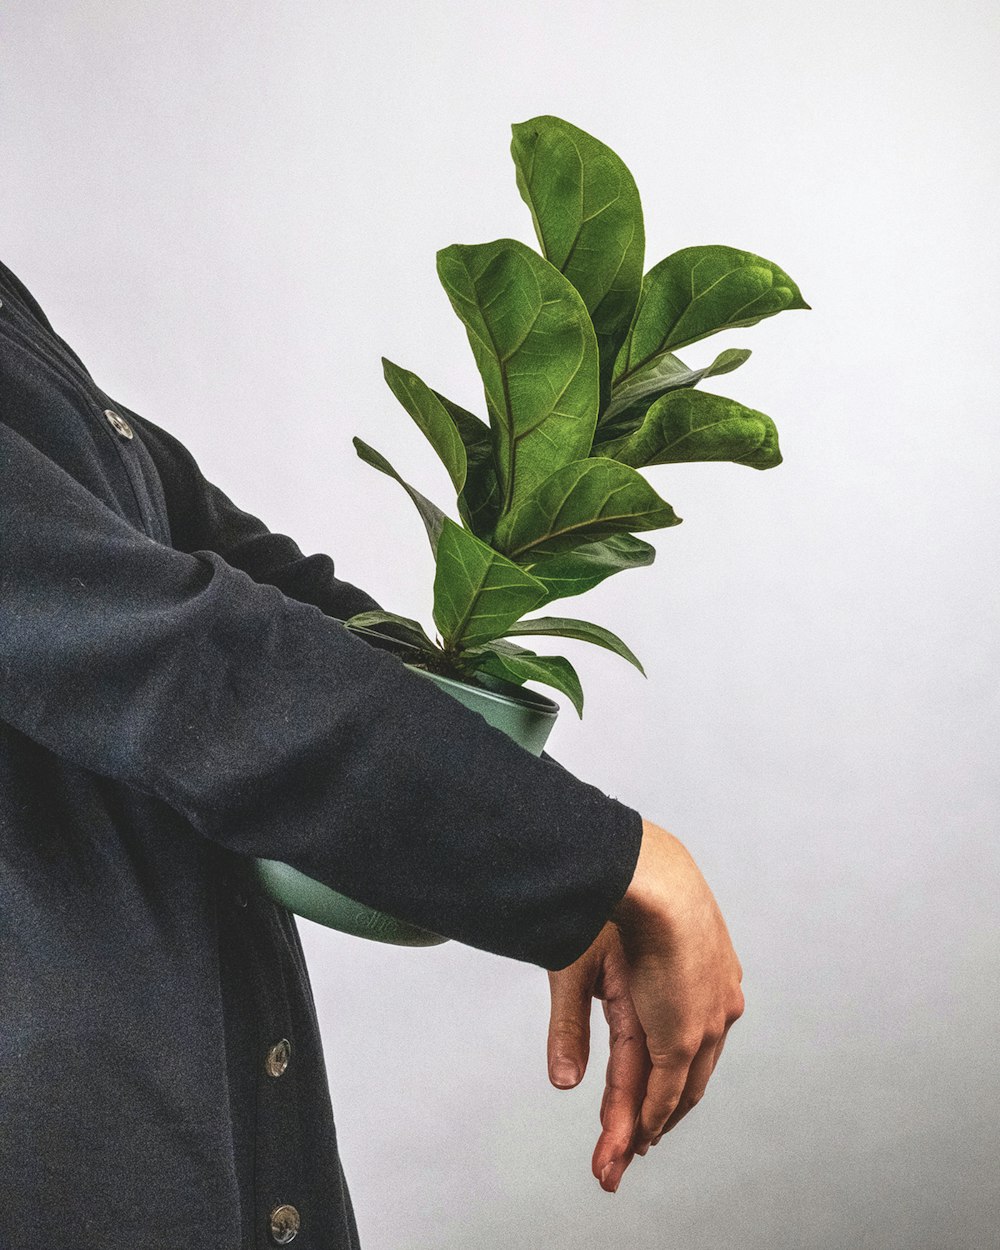 person in black coat holding green plant